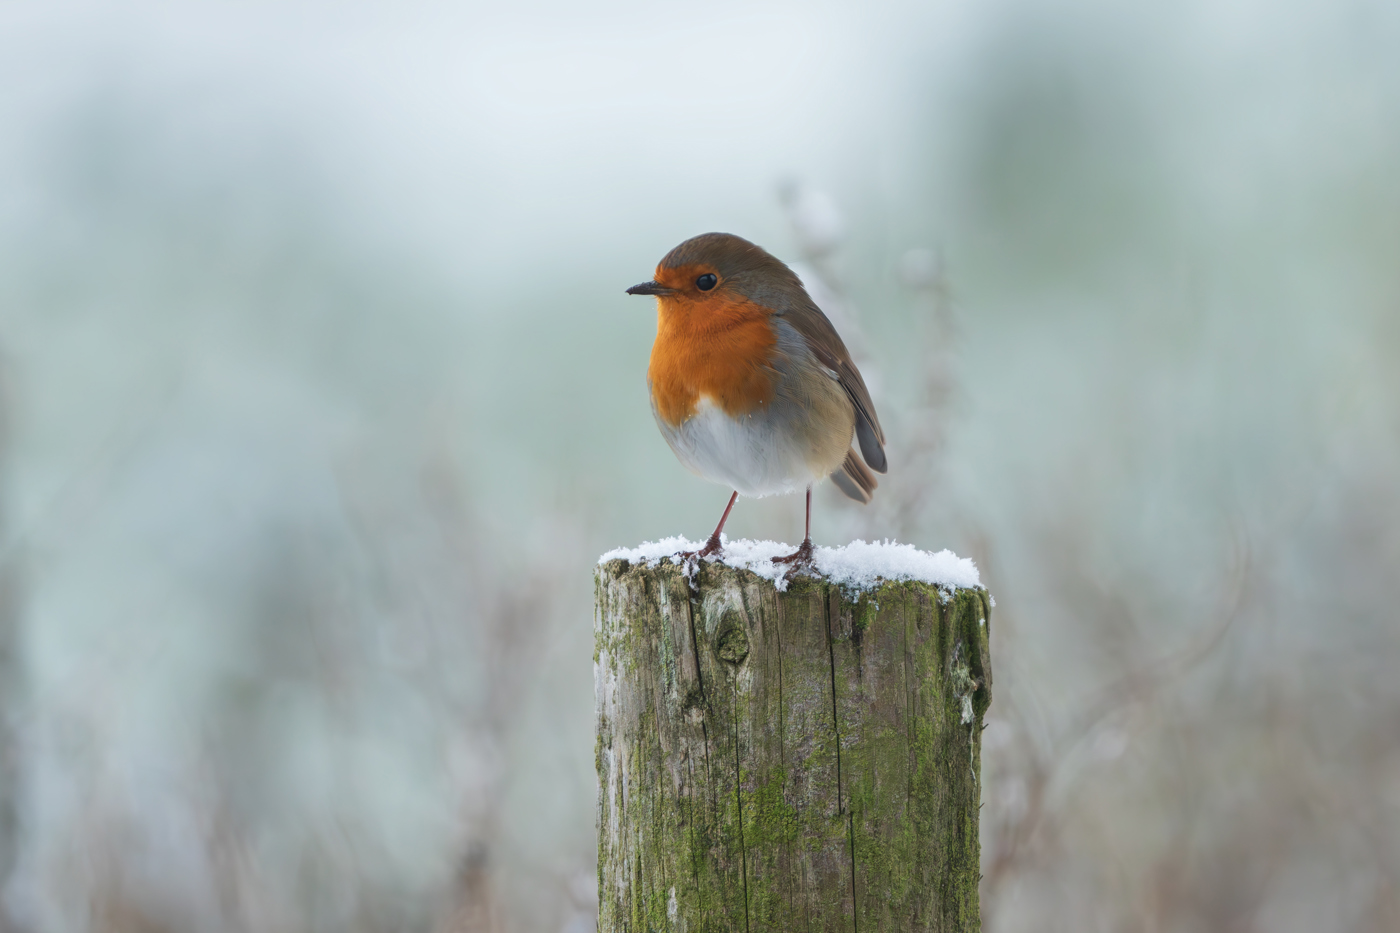 A plump European robin stands on a snow-dusted fence post, its bright orange breast contrasting with the muted winter backdrop of a North Yorkshire landscape. a bird on a post